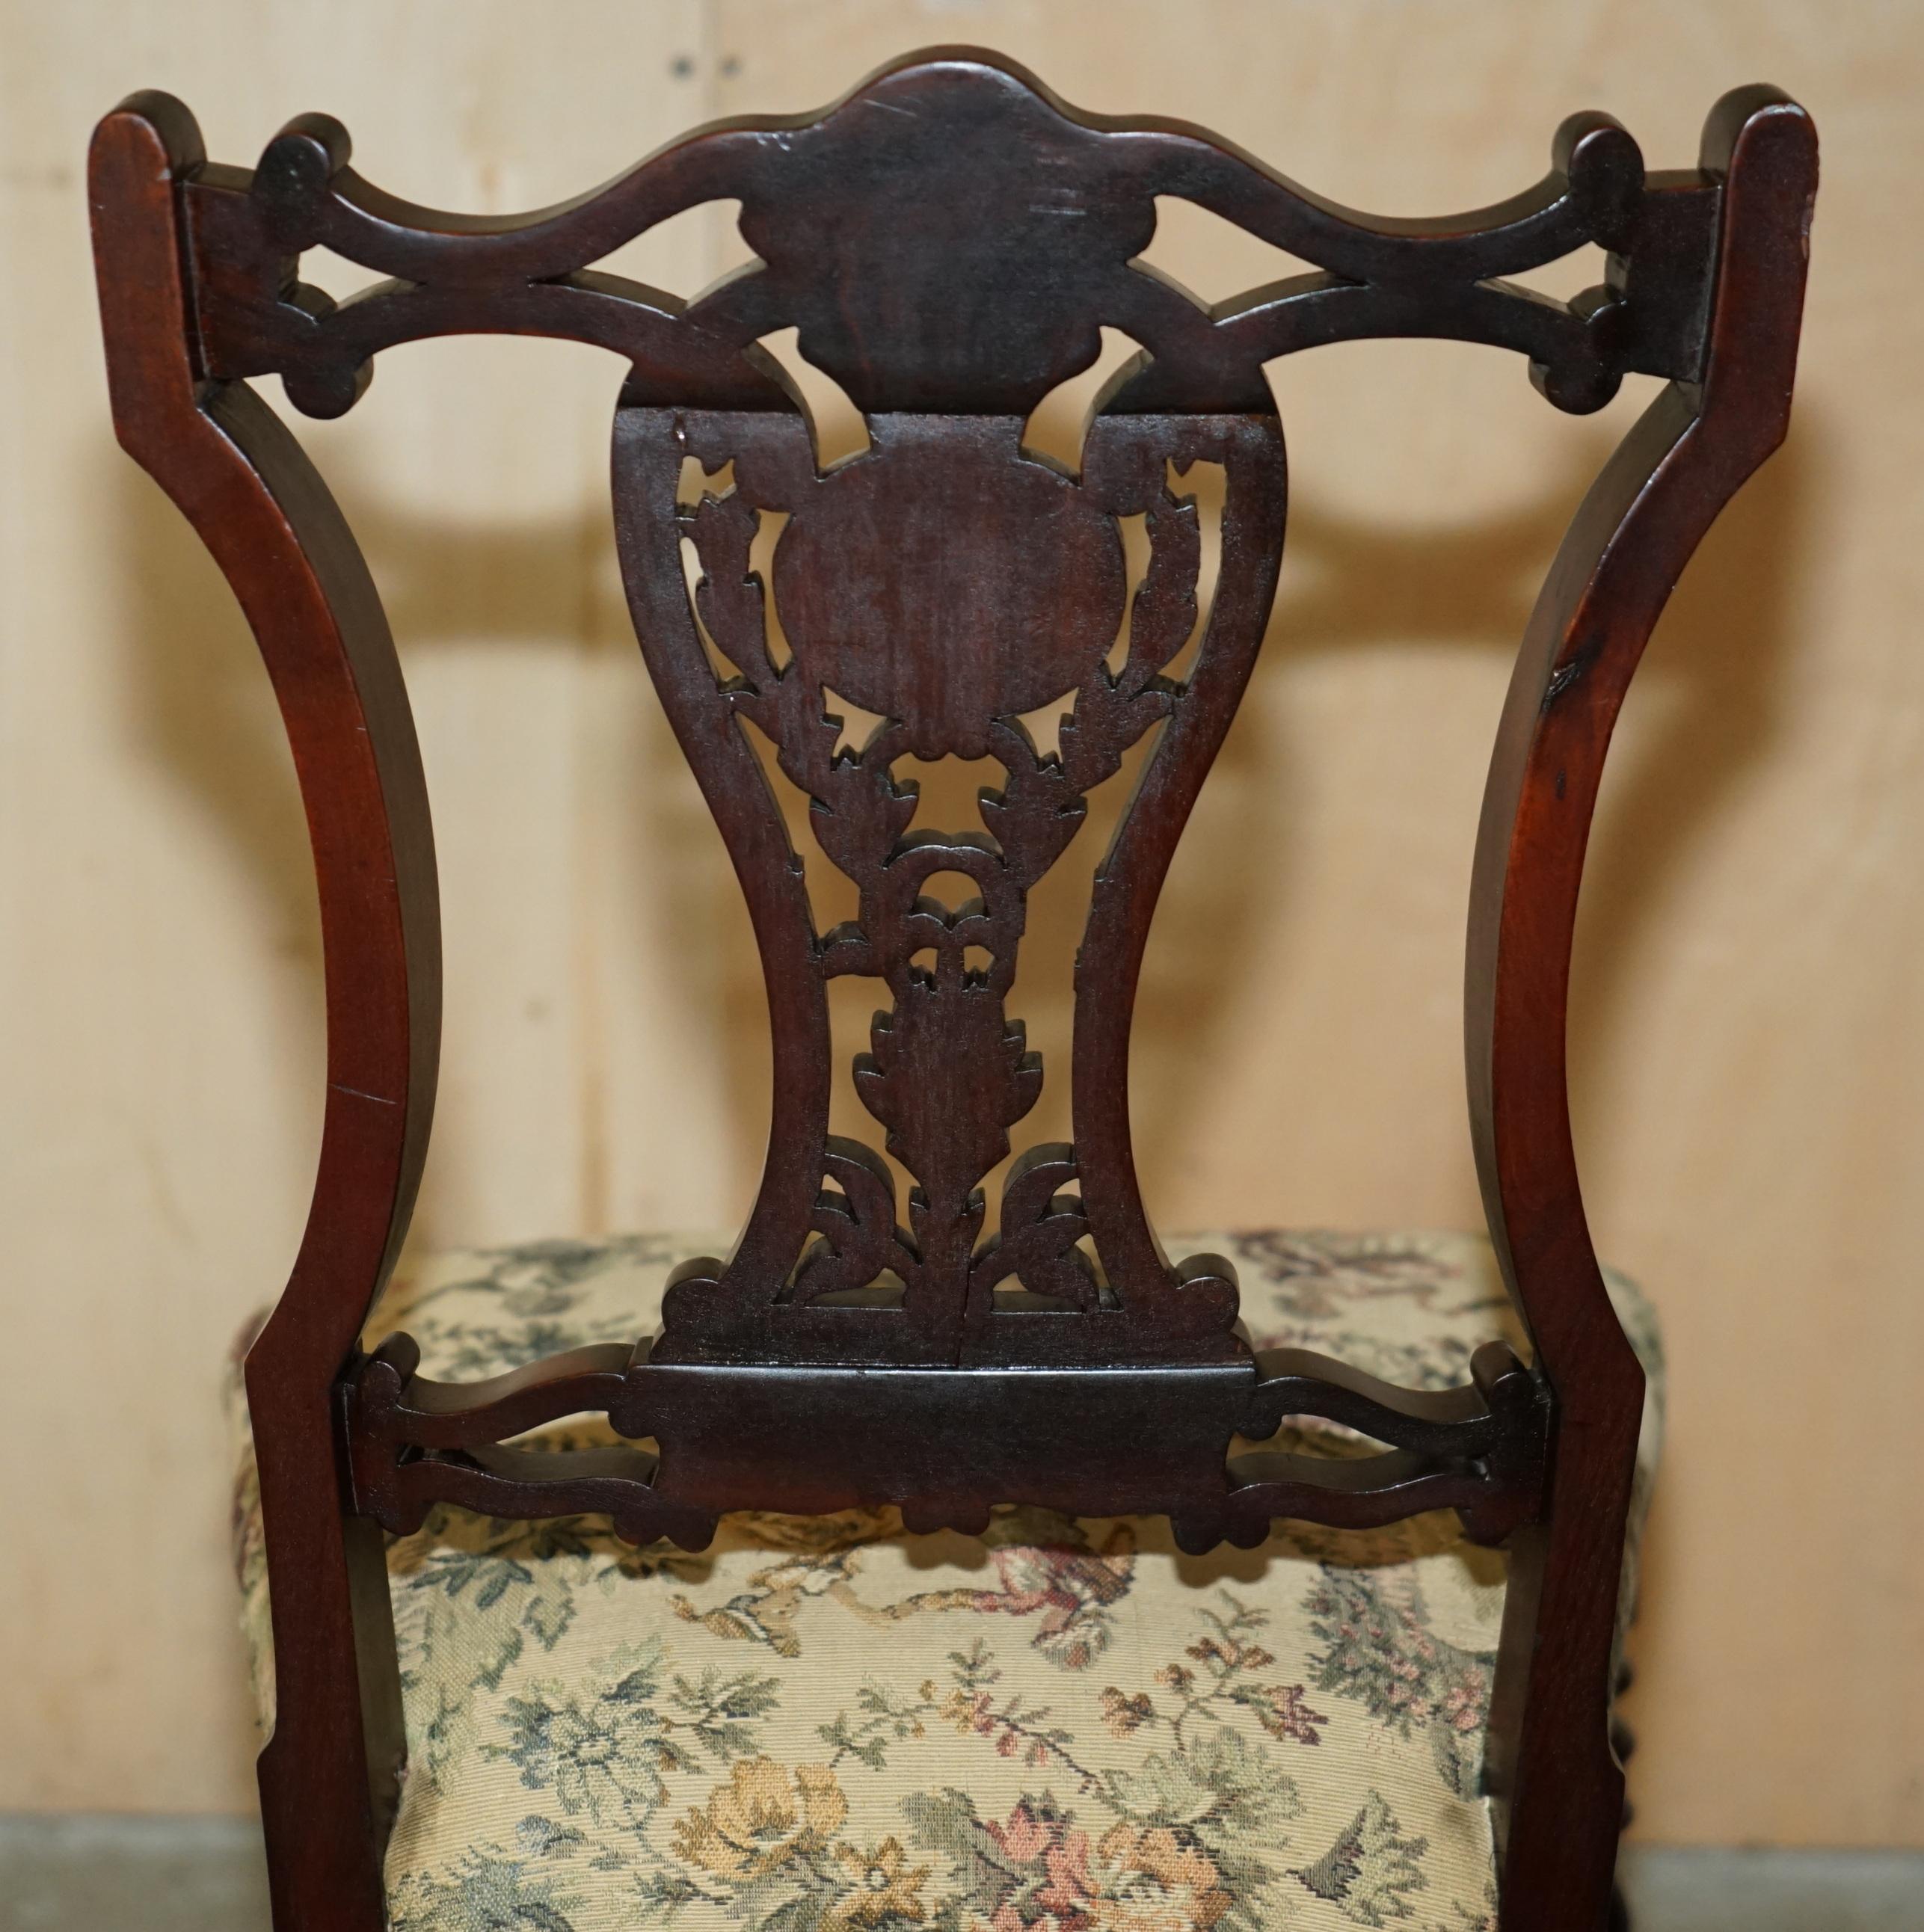 PAiR OF ANTIQUE VICTORIAN HARDWOOD SALON CHAIRS WITH STUNNING INLAID BACK PANELS For Sale 5